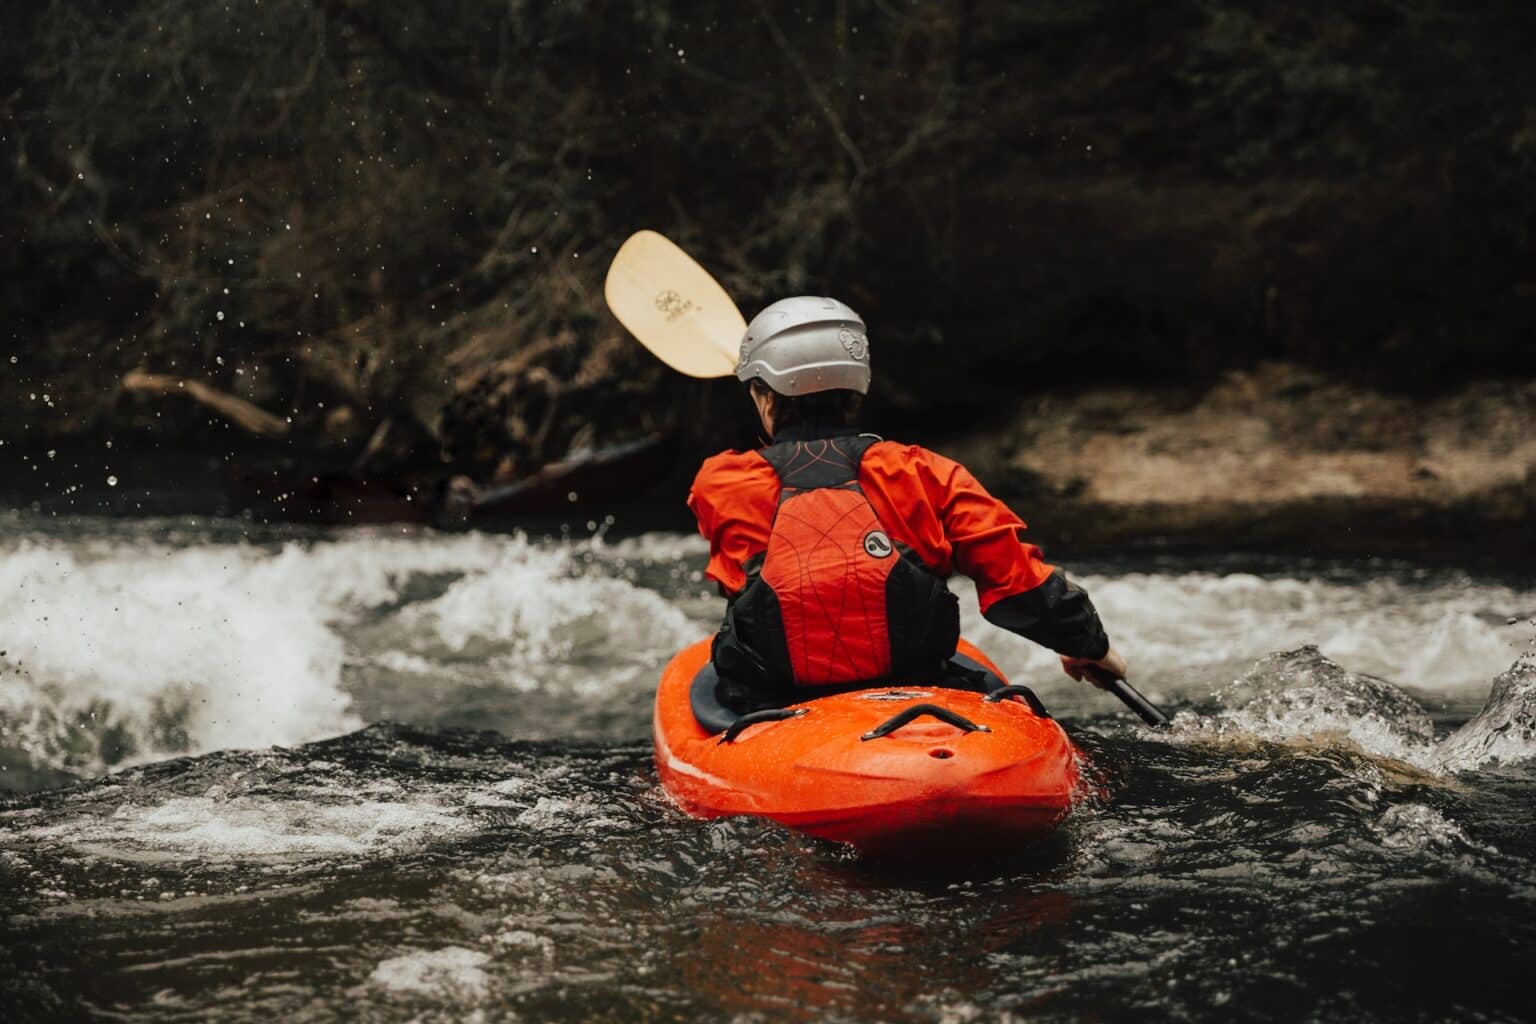 Kayaker in red gear navigating whitewater rapids